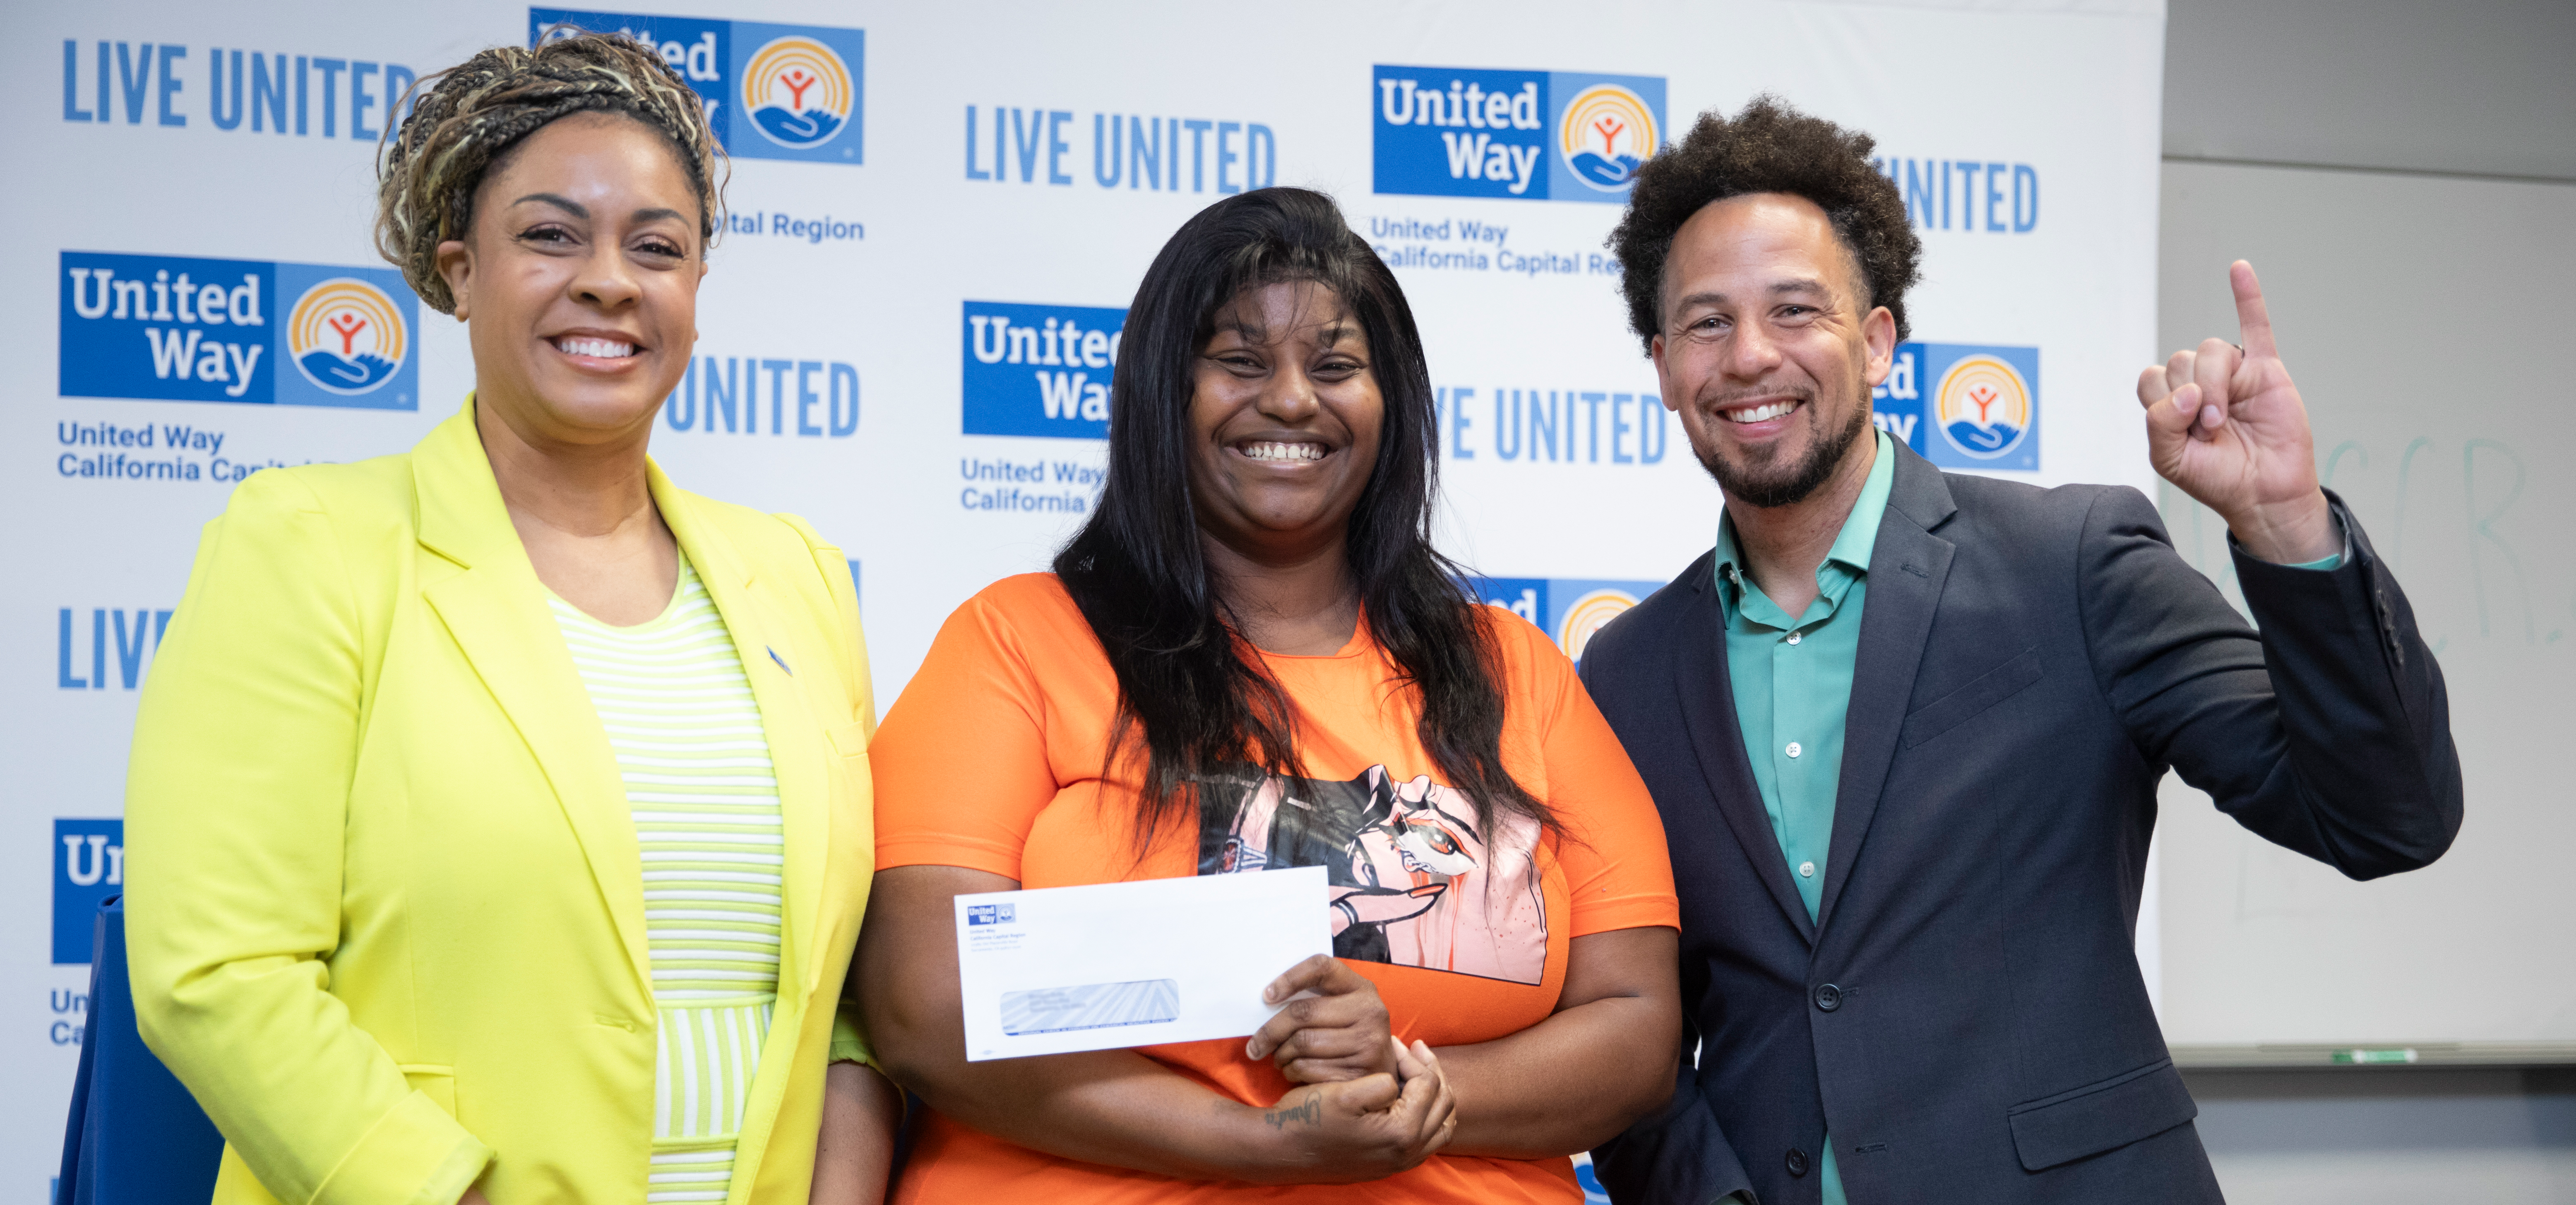 Dr. Early of United Way and Dr. Wood of Sac State pose with one of the recipients of the Collegiate Guaranteed Income Program